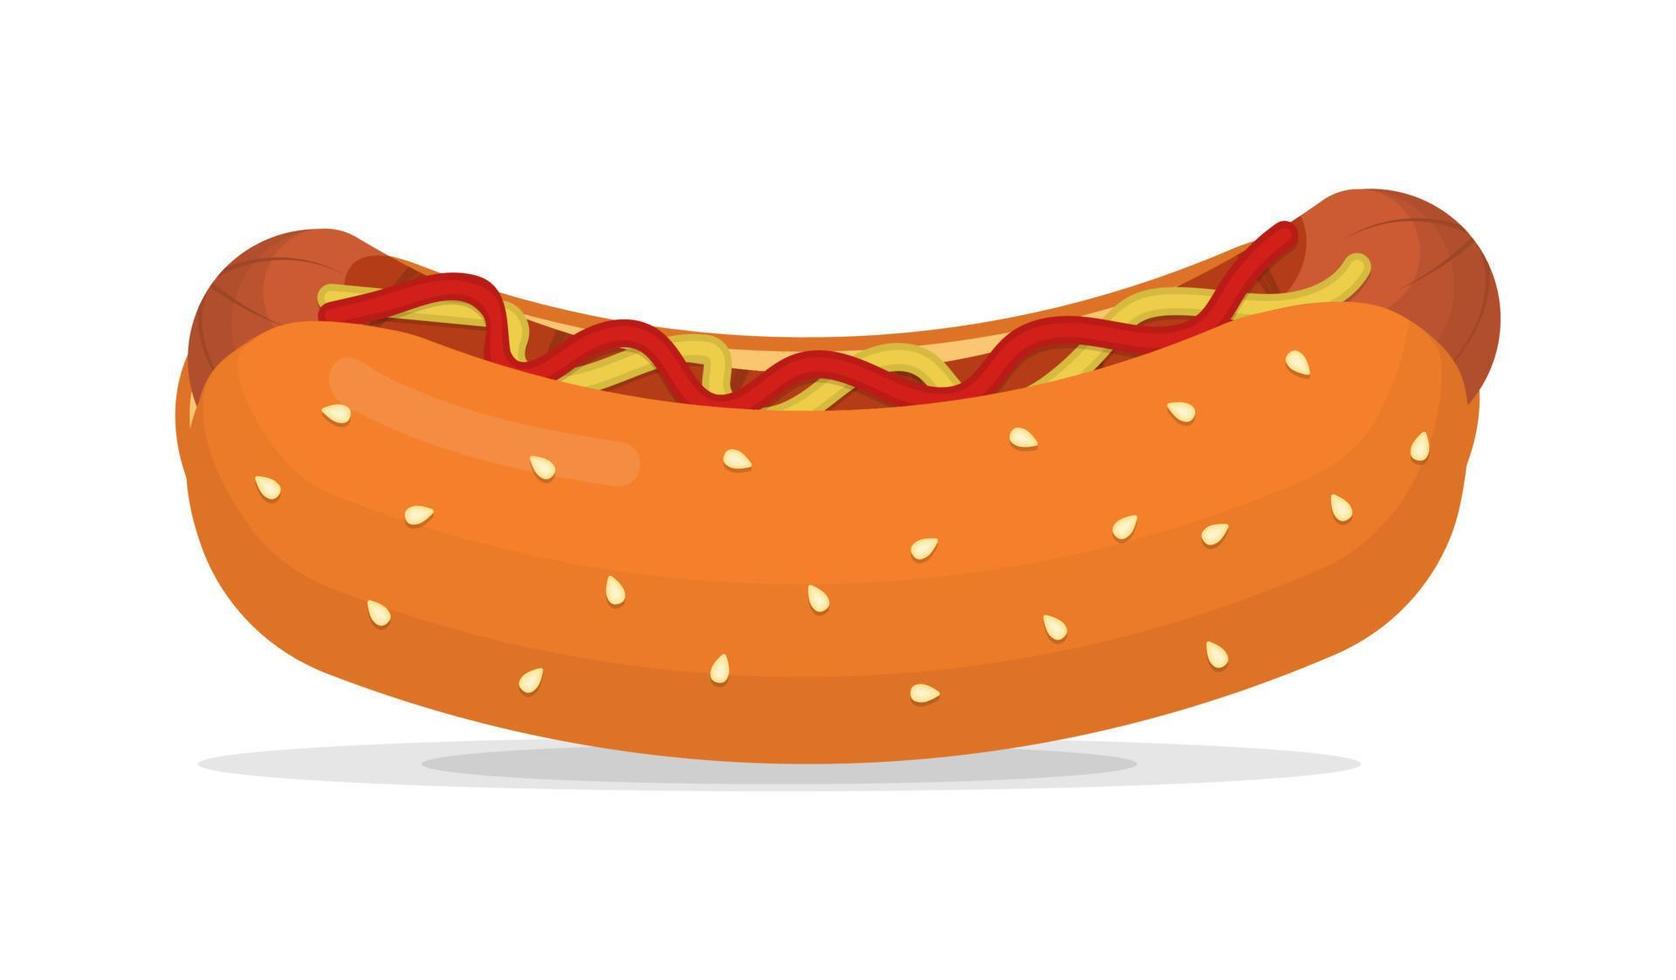 Classic hot dog with sausage, ketchup and mustard flat illustration vector